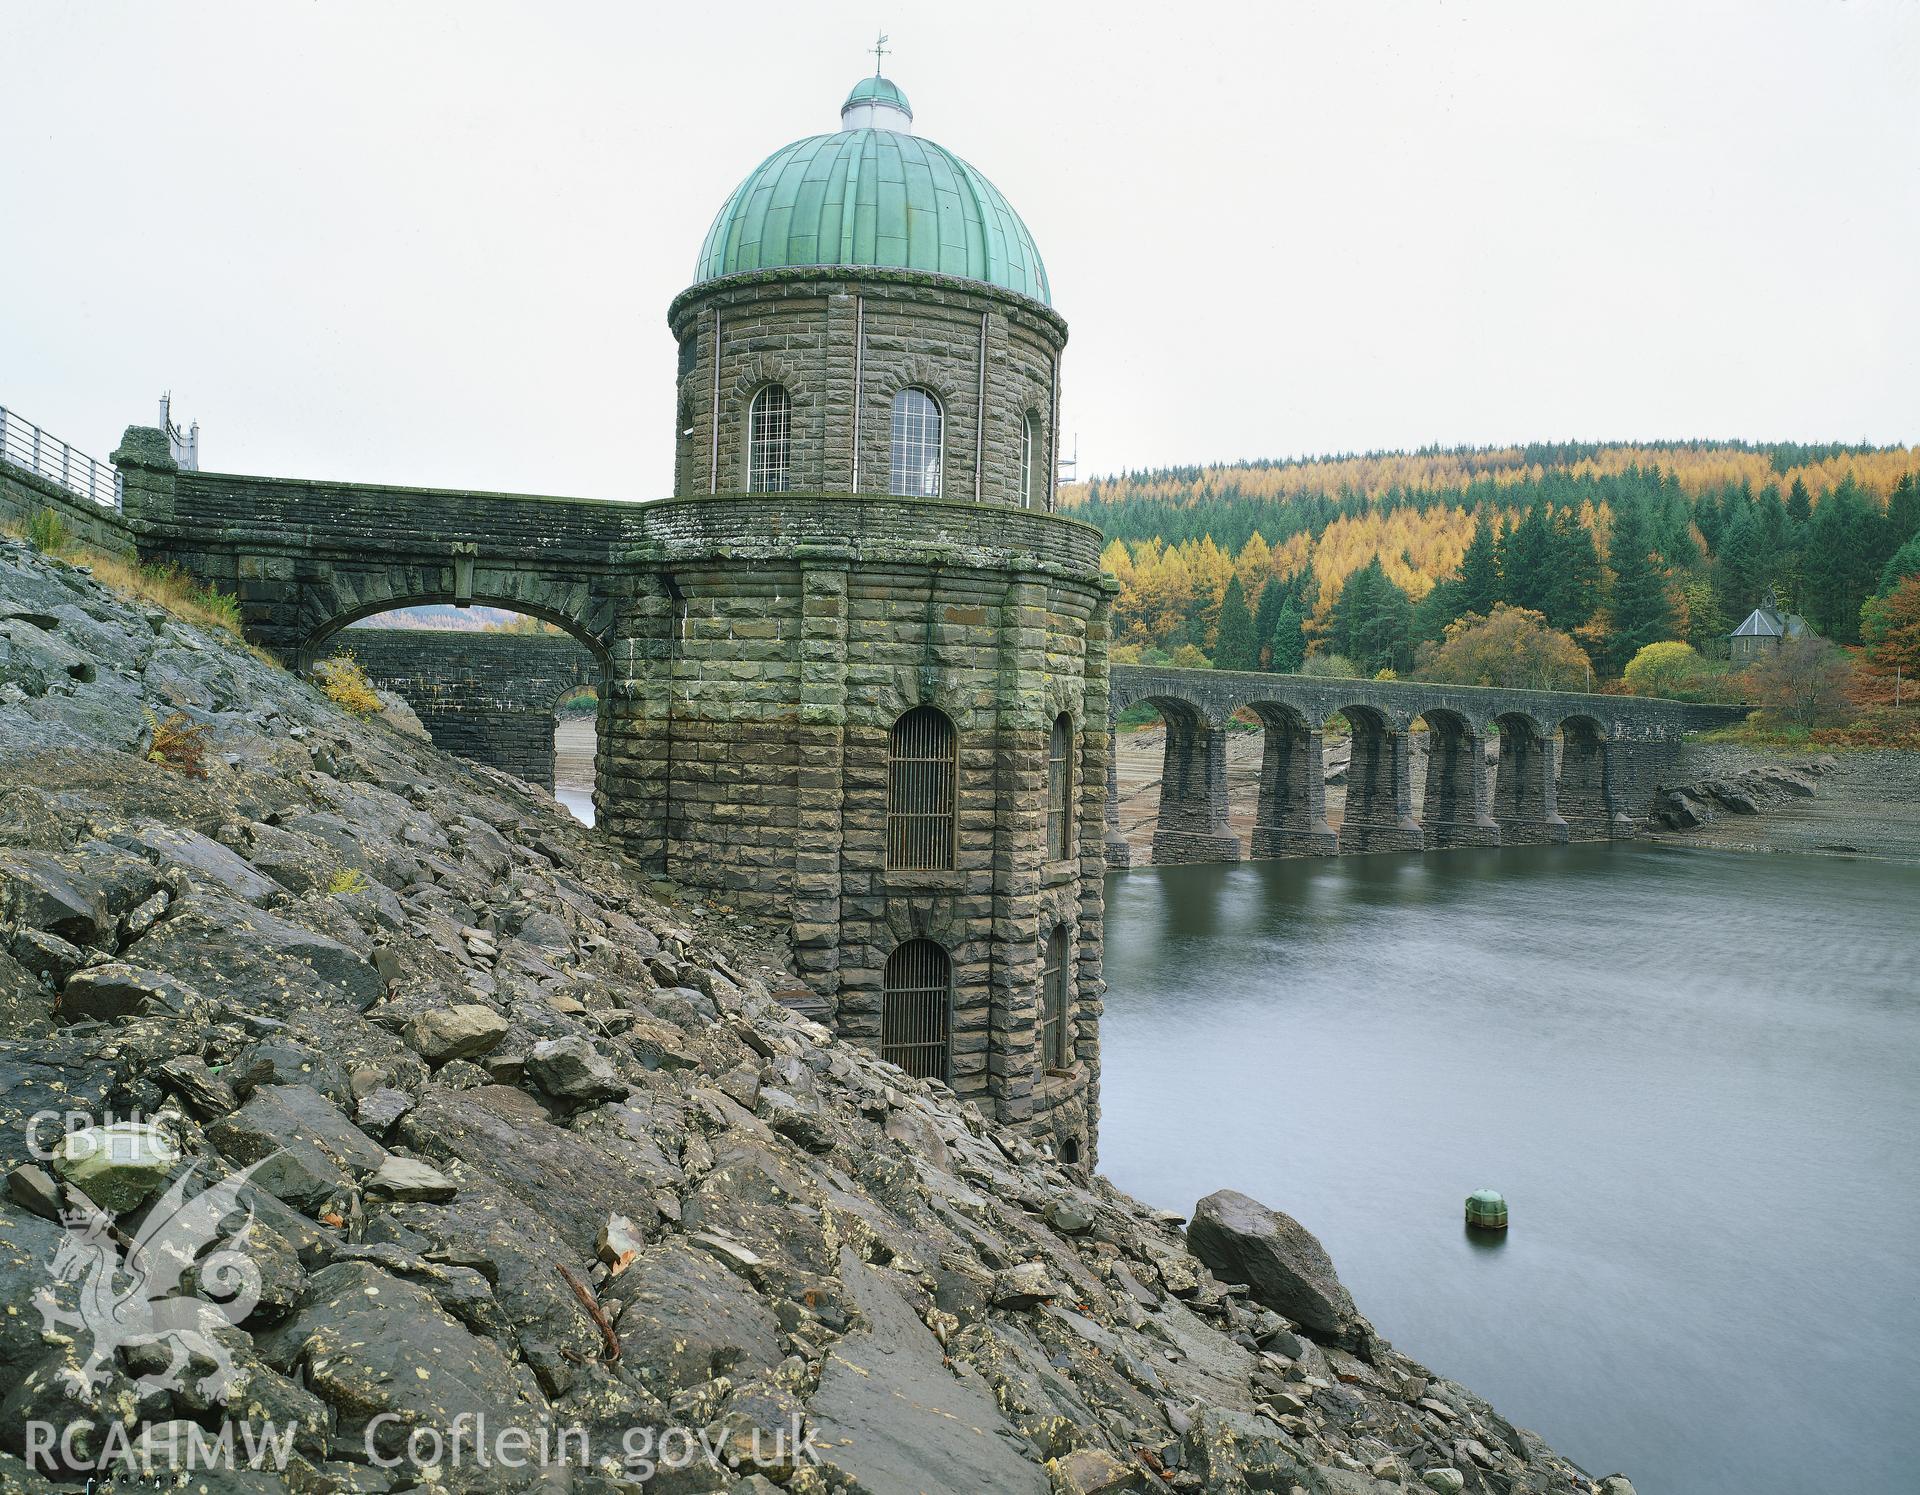 RCAHMW colour transparency of a general view at low water level of Pen y Garreg Dam and the straining tower.